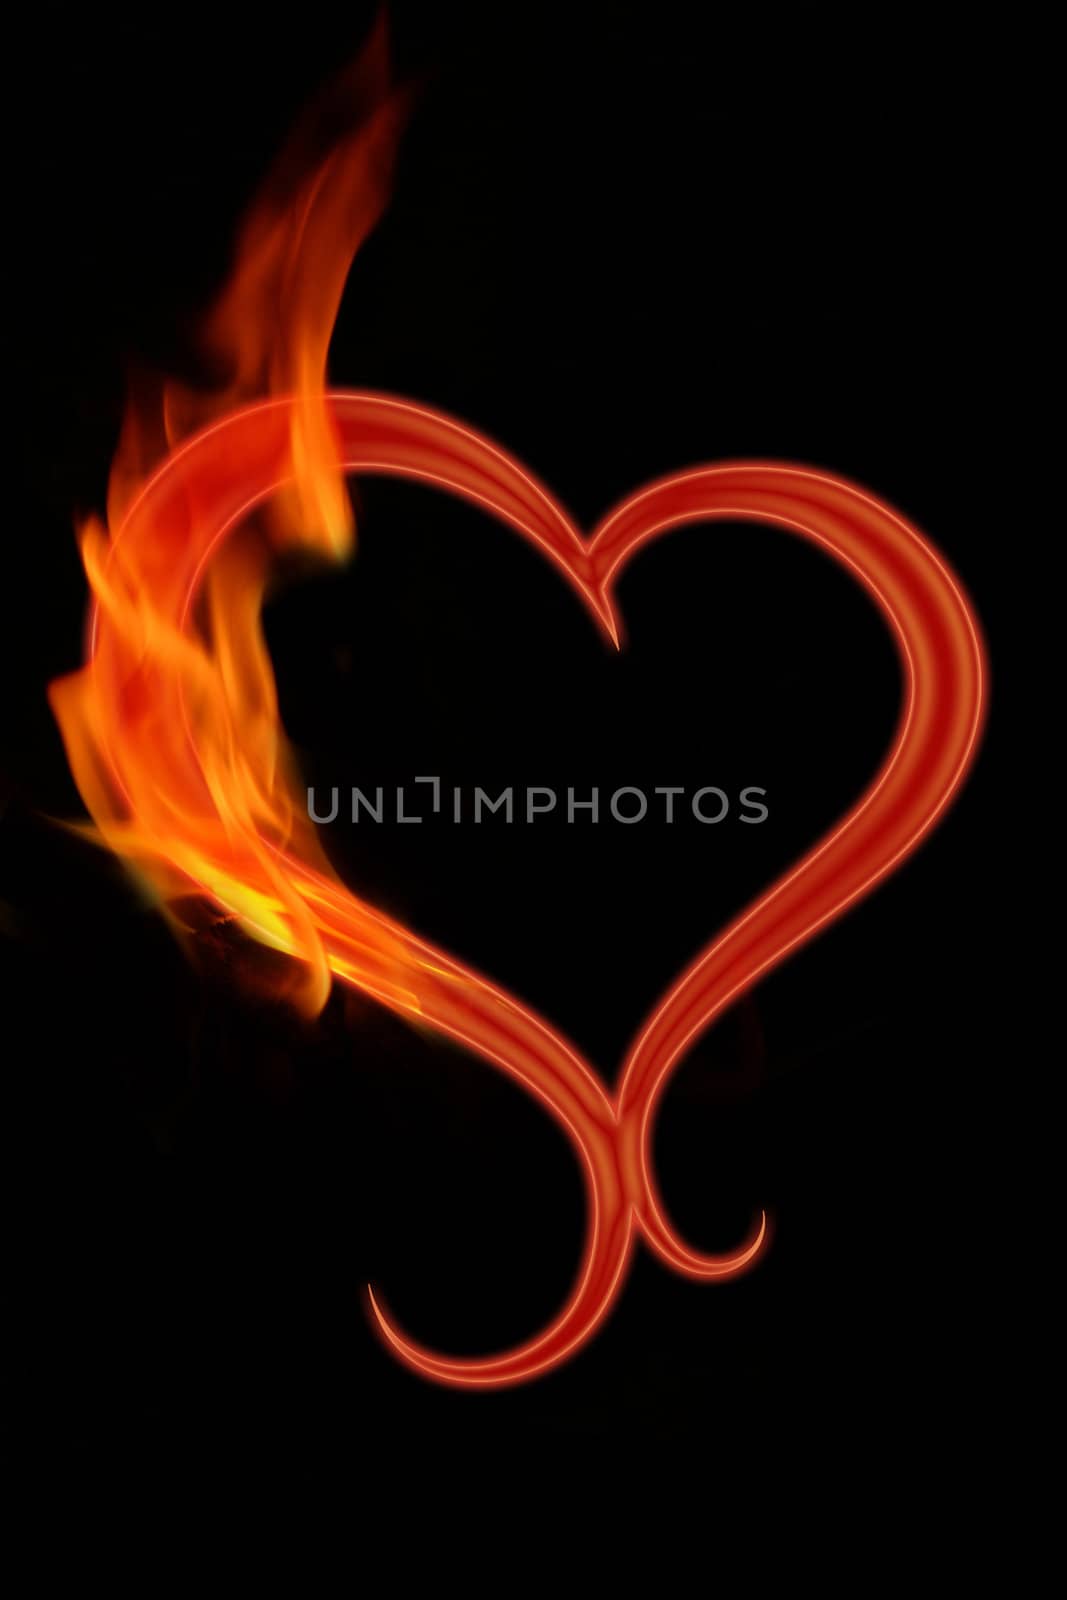 heart with flames on a black background